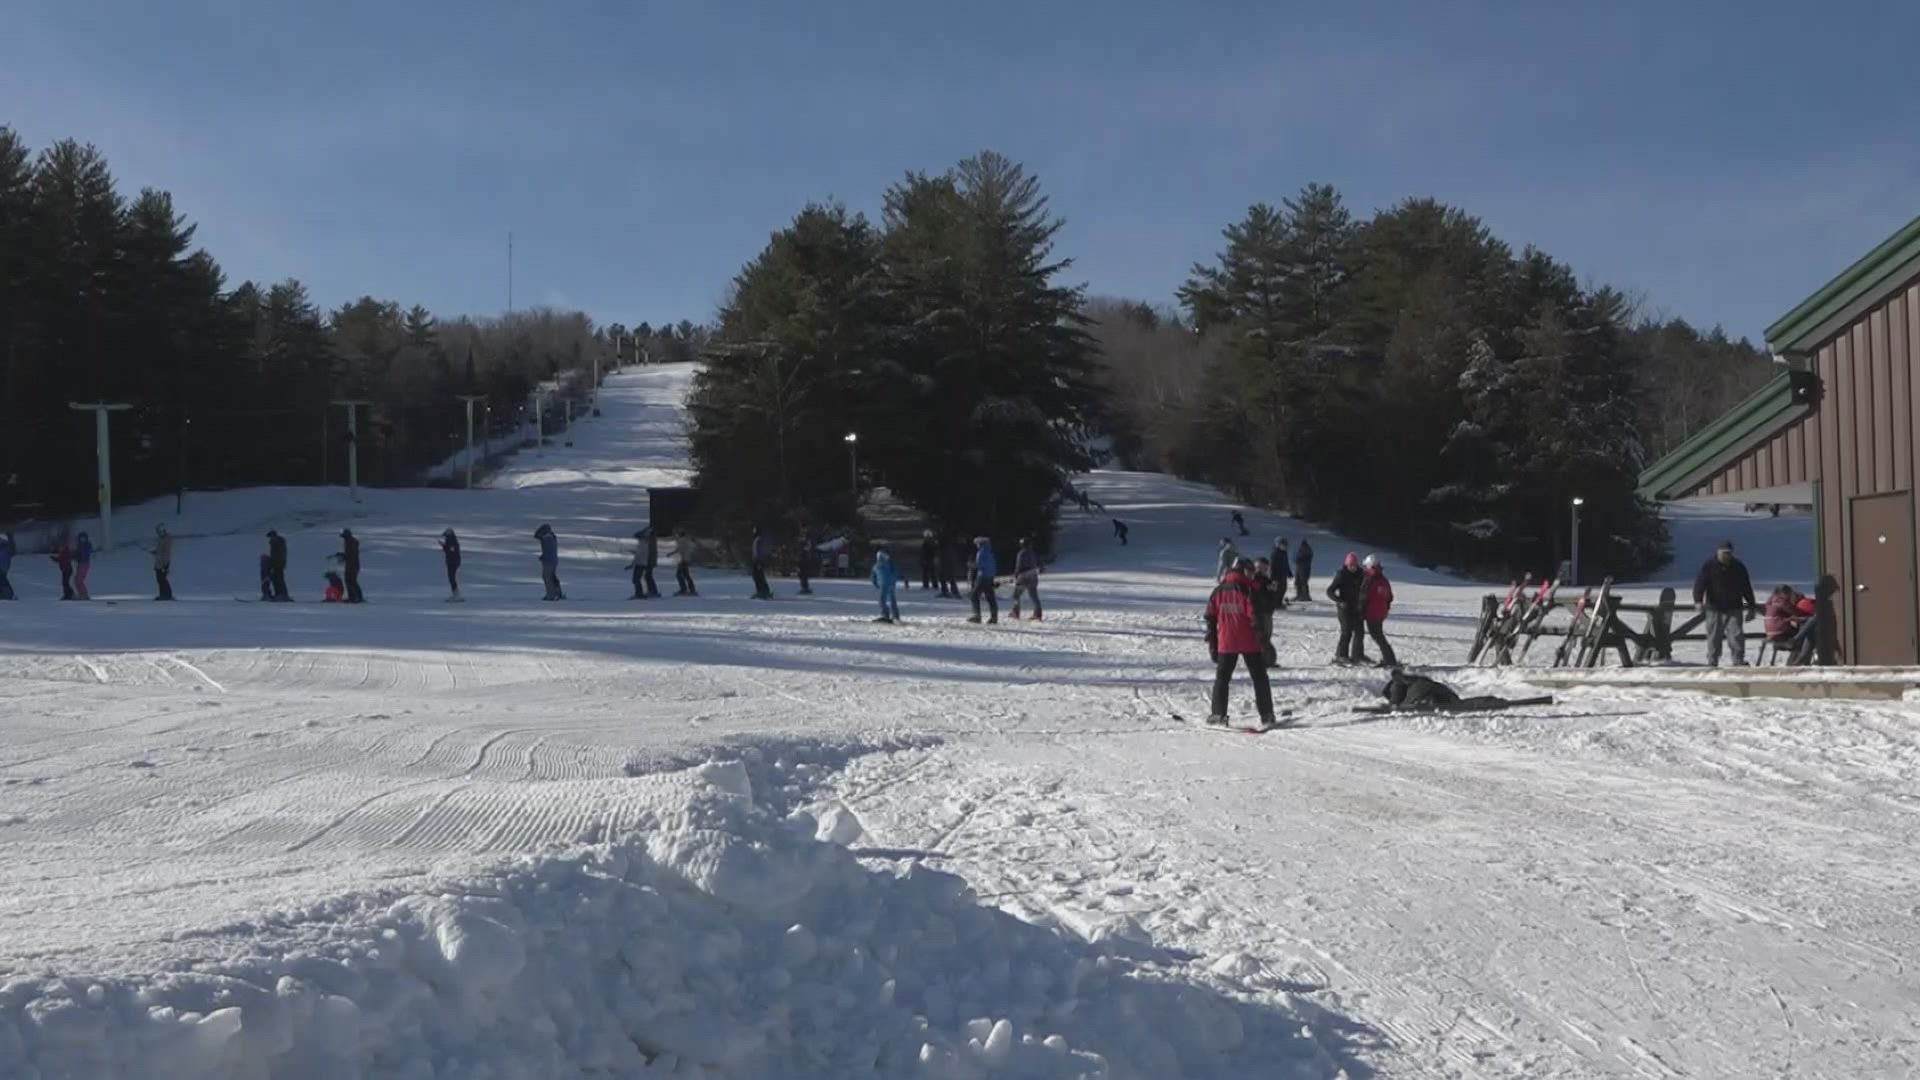 Co-owner Bill Whitcomb said temperatures, humidity made snowmaking difficult.